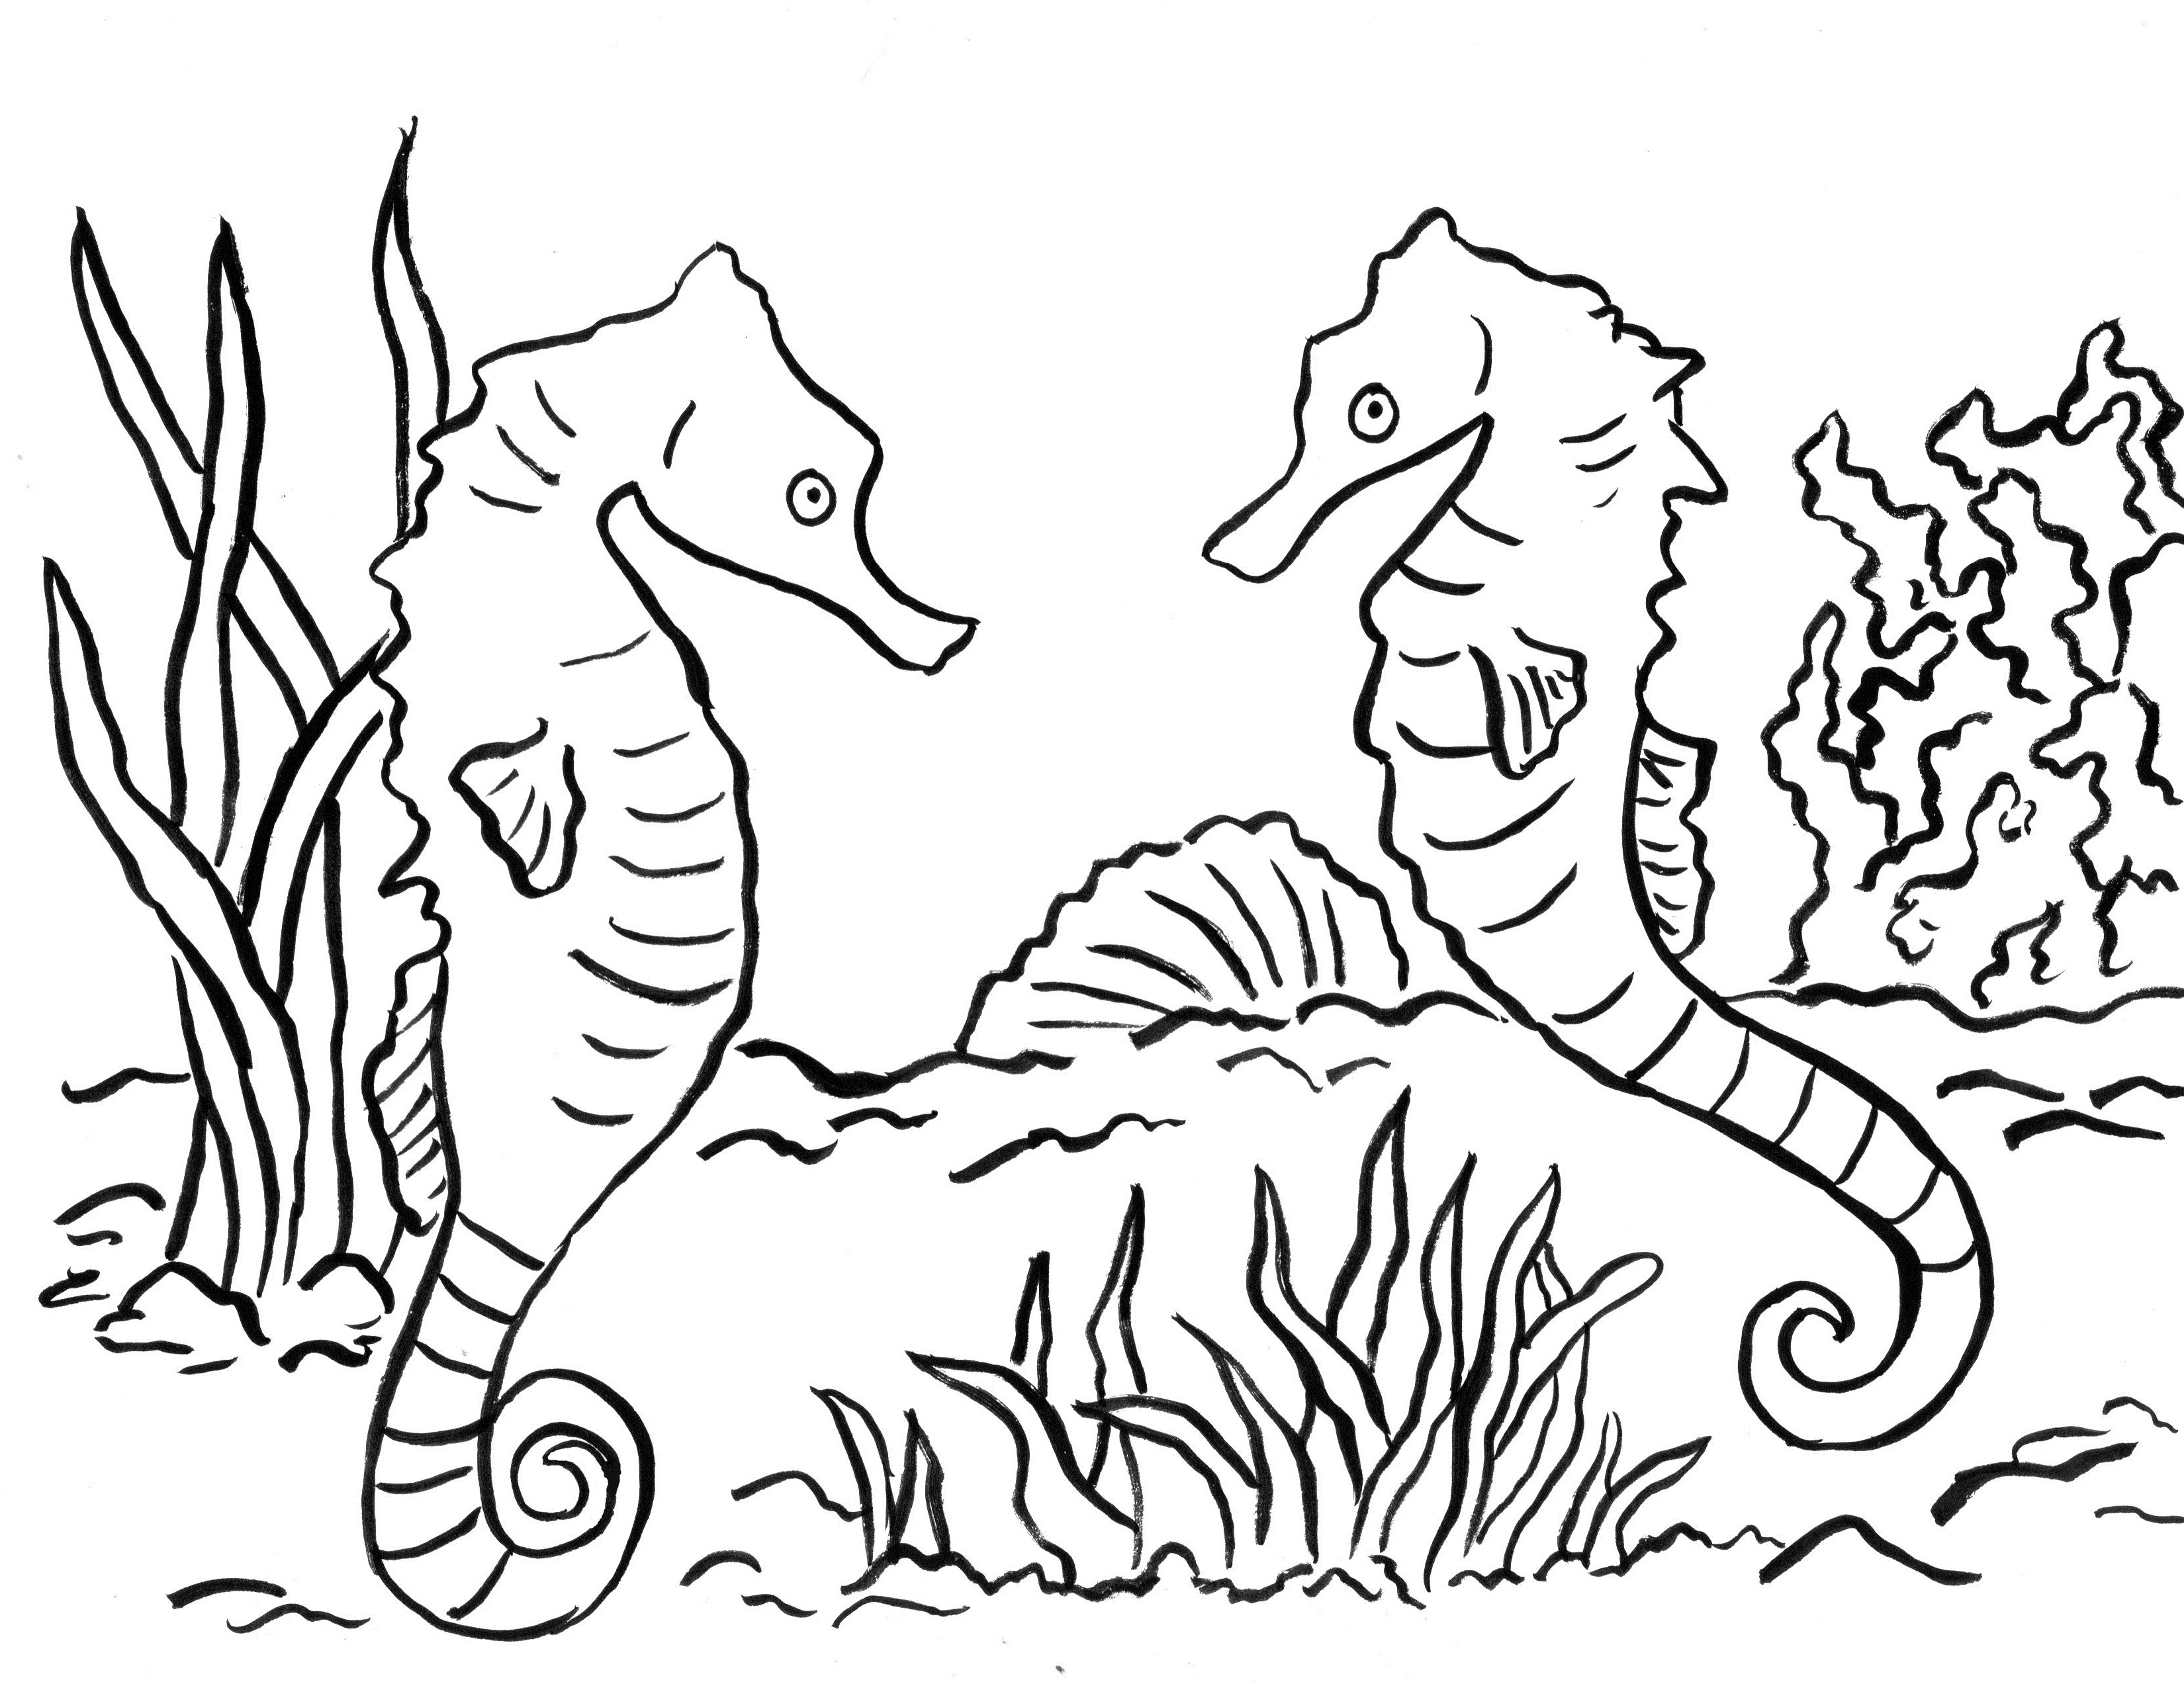 Seahorse Coloring Page Art Starts